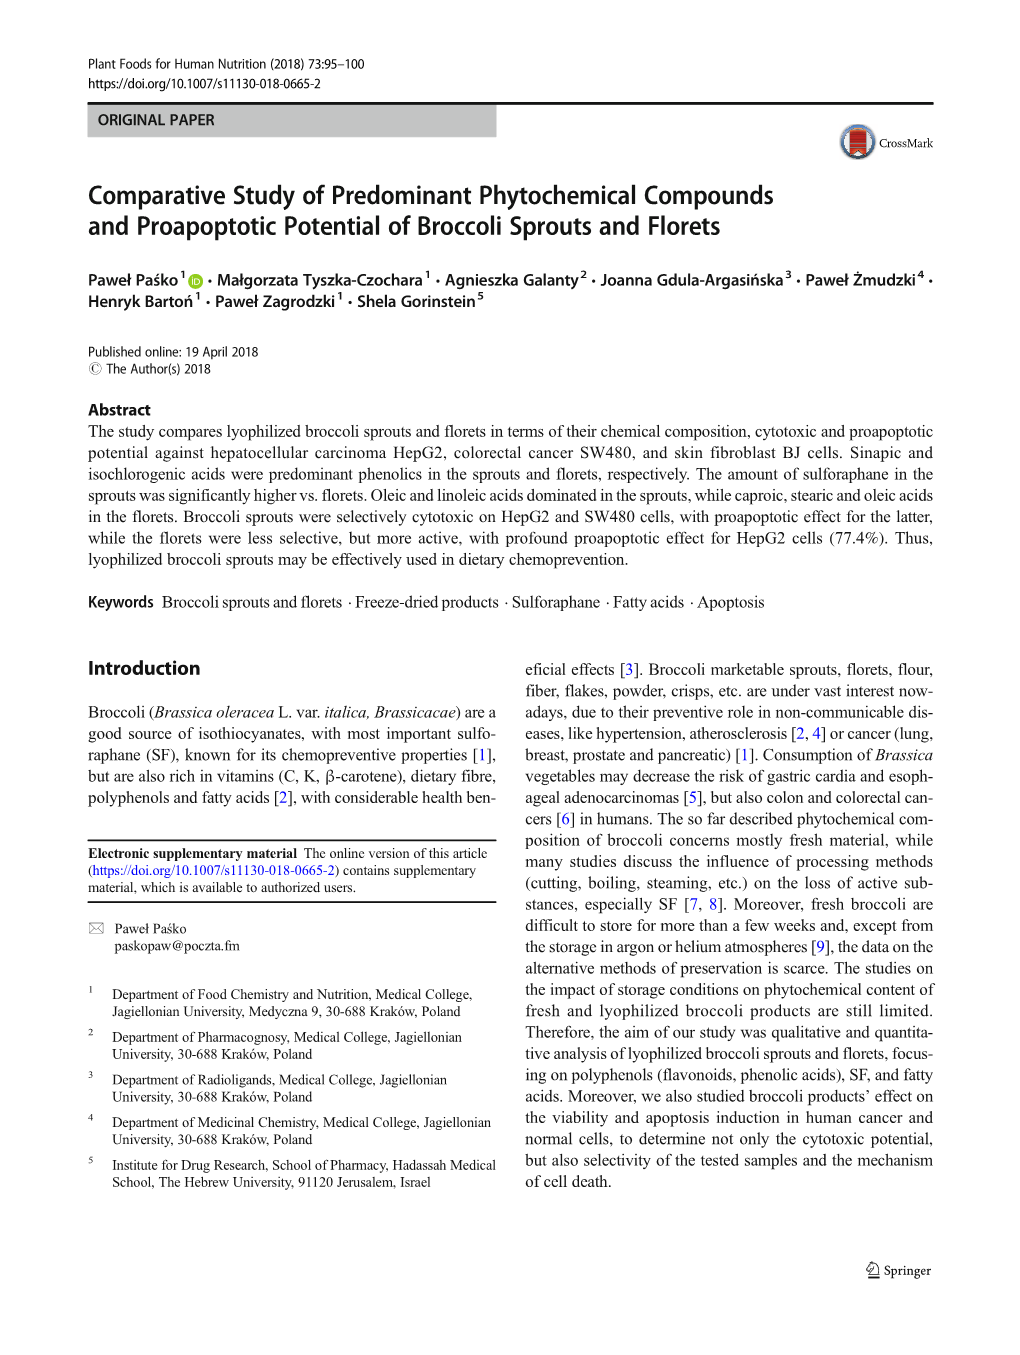 Comparative Study of Predominant Phytochemical Compounds and Proapoptotic Potential of Broccoli Sprouts and Florets